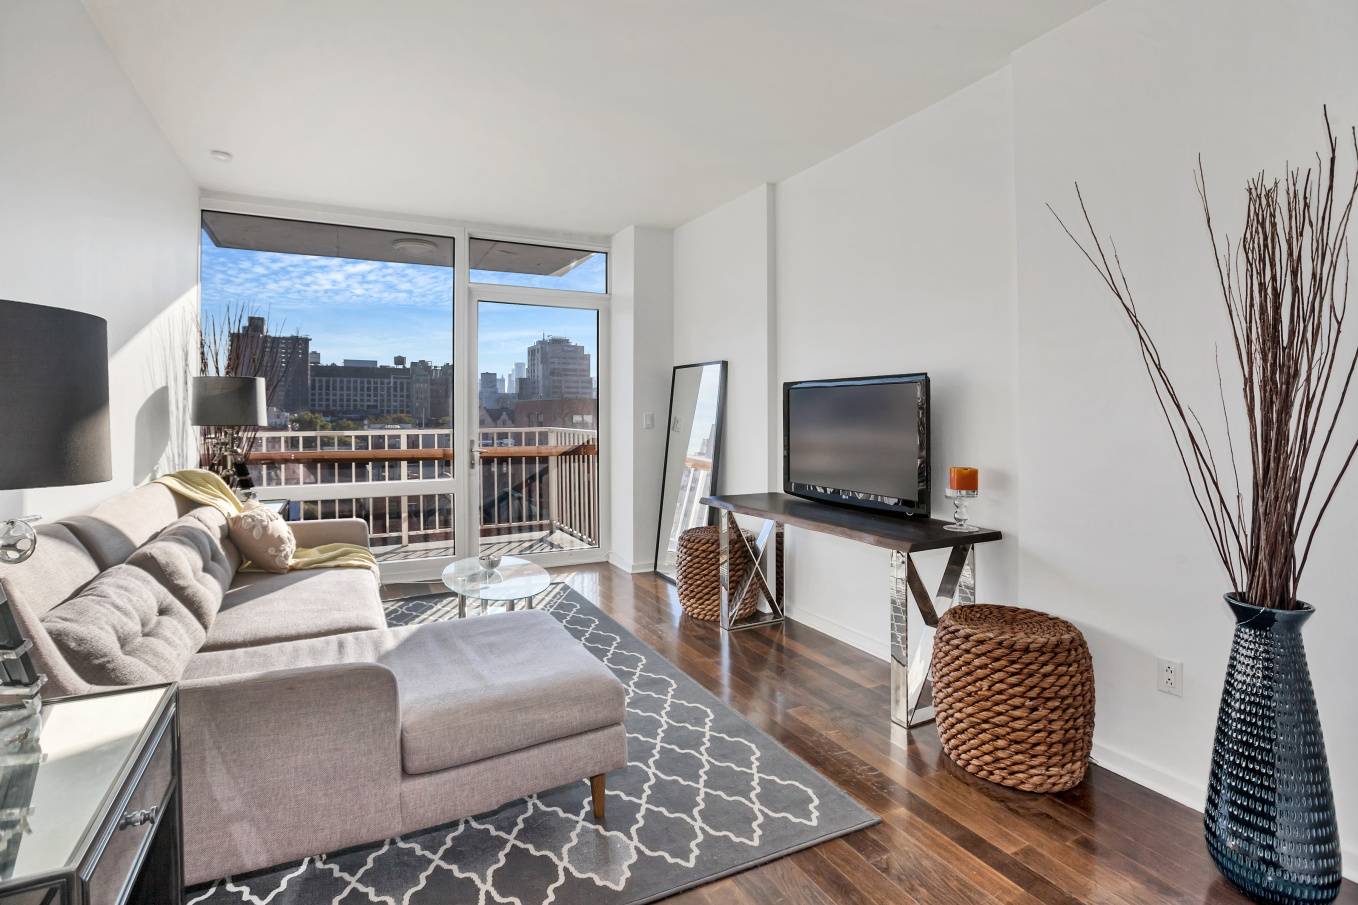 Surround yourself in breathtaking views, private outdoor space and exceptional interiors in this designer one bedroom, one bathroom home in a full service luxury Gramercy condominium.